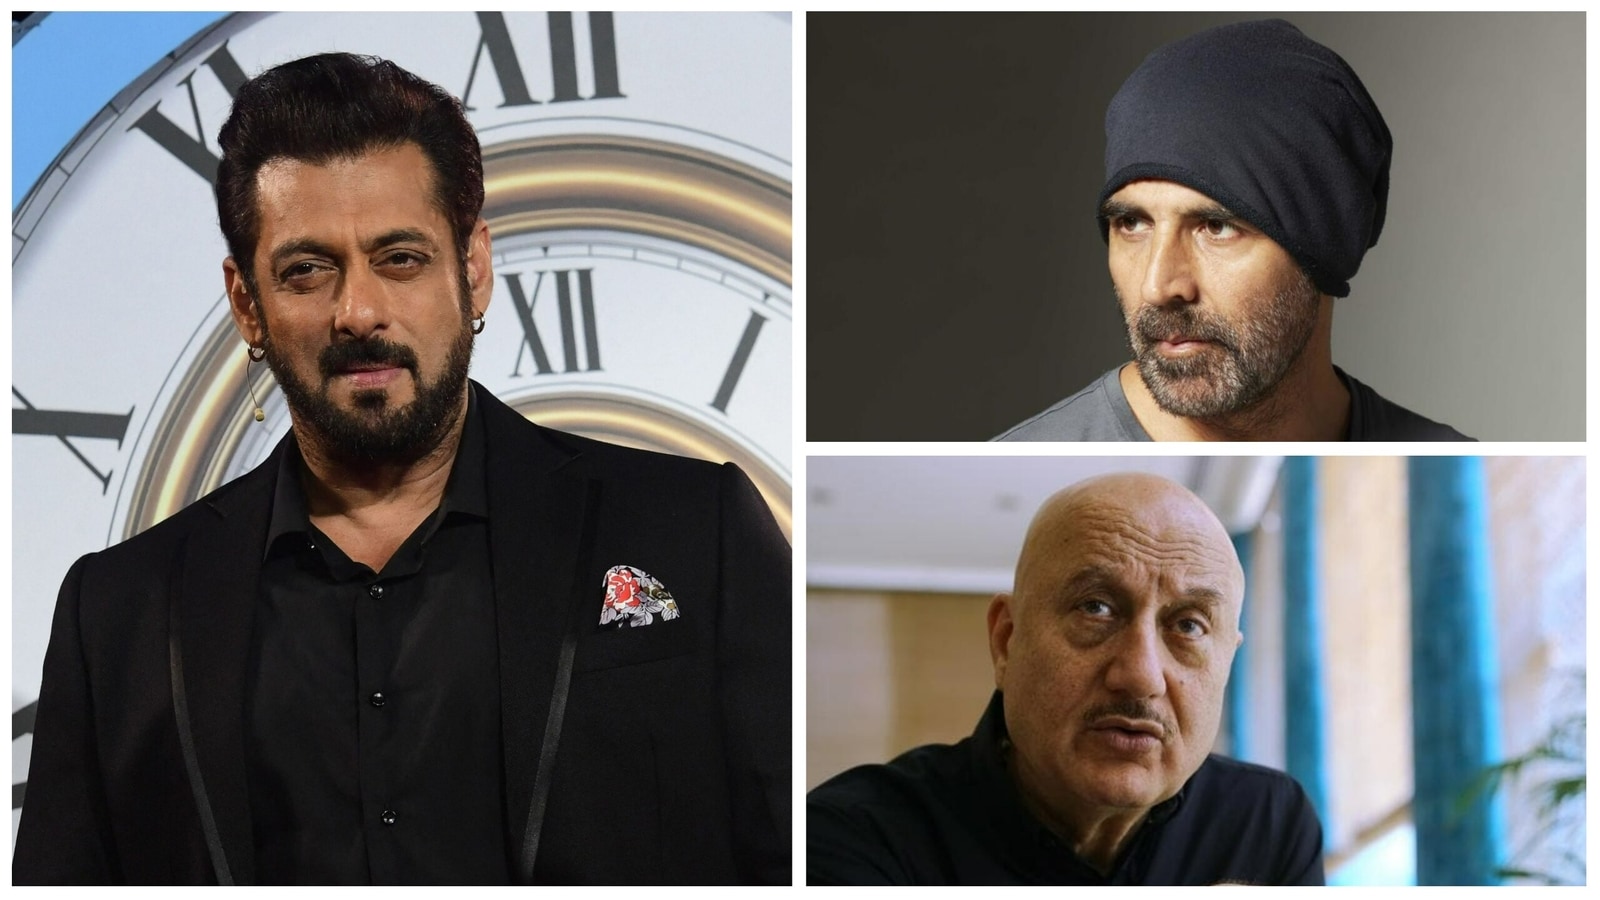 Salman Khan gets Y+ security after threats from Lawrence Bishnoi gang; Akshay Kumar, Anupam Kher get X category security